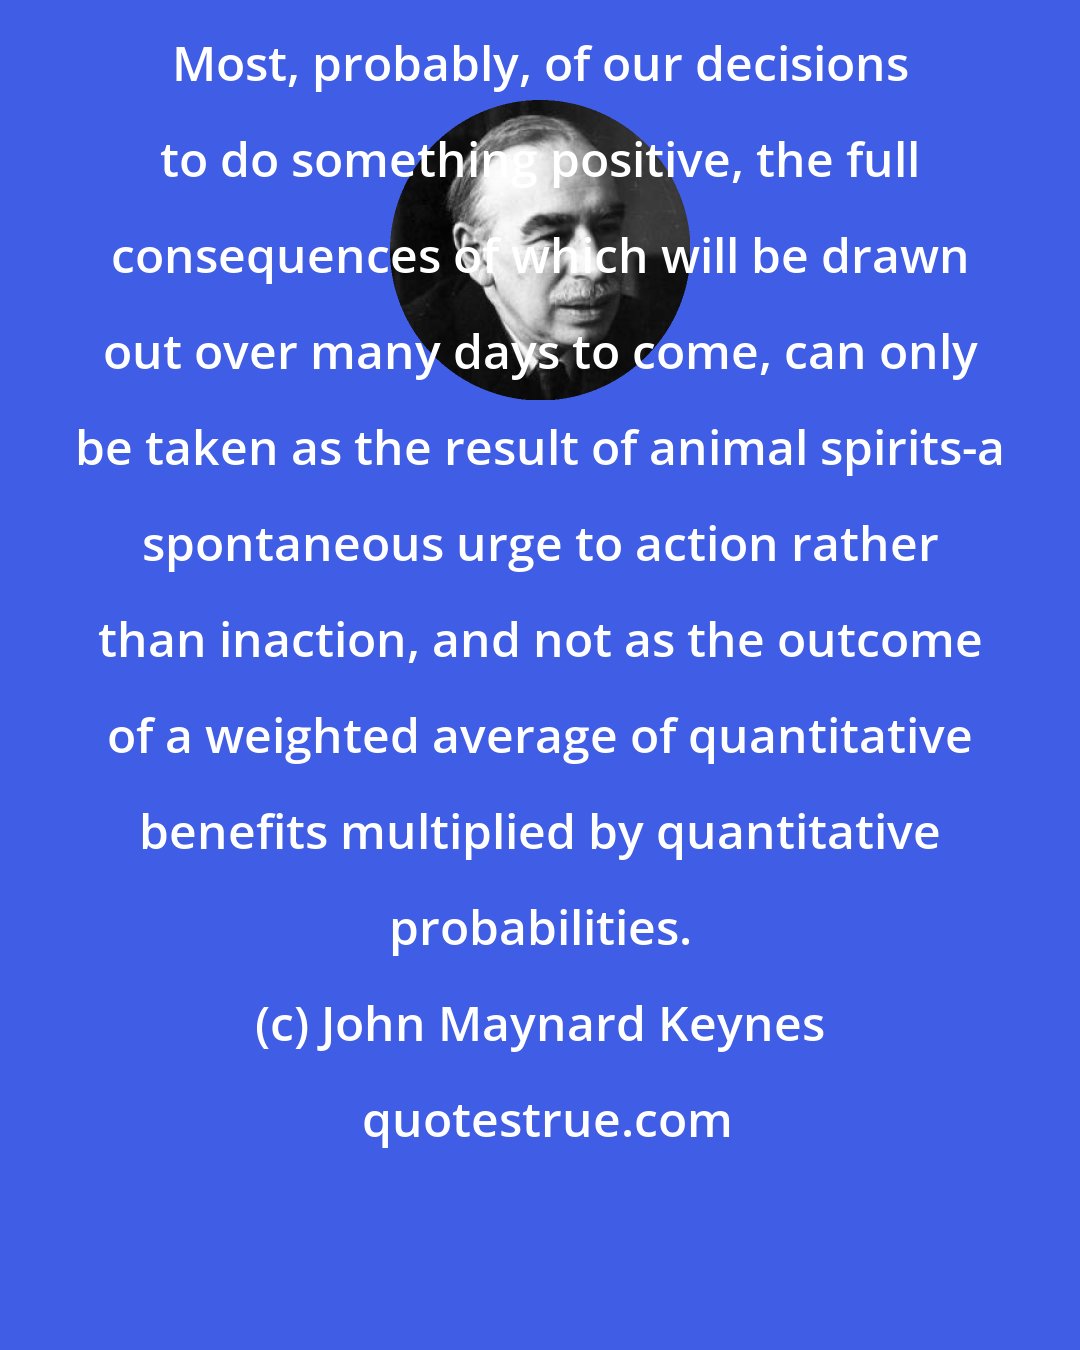 John Maynard Keynes: Most, probably, of our decisions to do something positive, the full consequences of which will be drawn out over many days to come, can only be taken as the result of animal spirits-a spontaneous urge to action rather than inaction, and not as the outcome of a weighted average of quantitative benefits multiplied by quantitative probabilities.